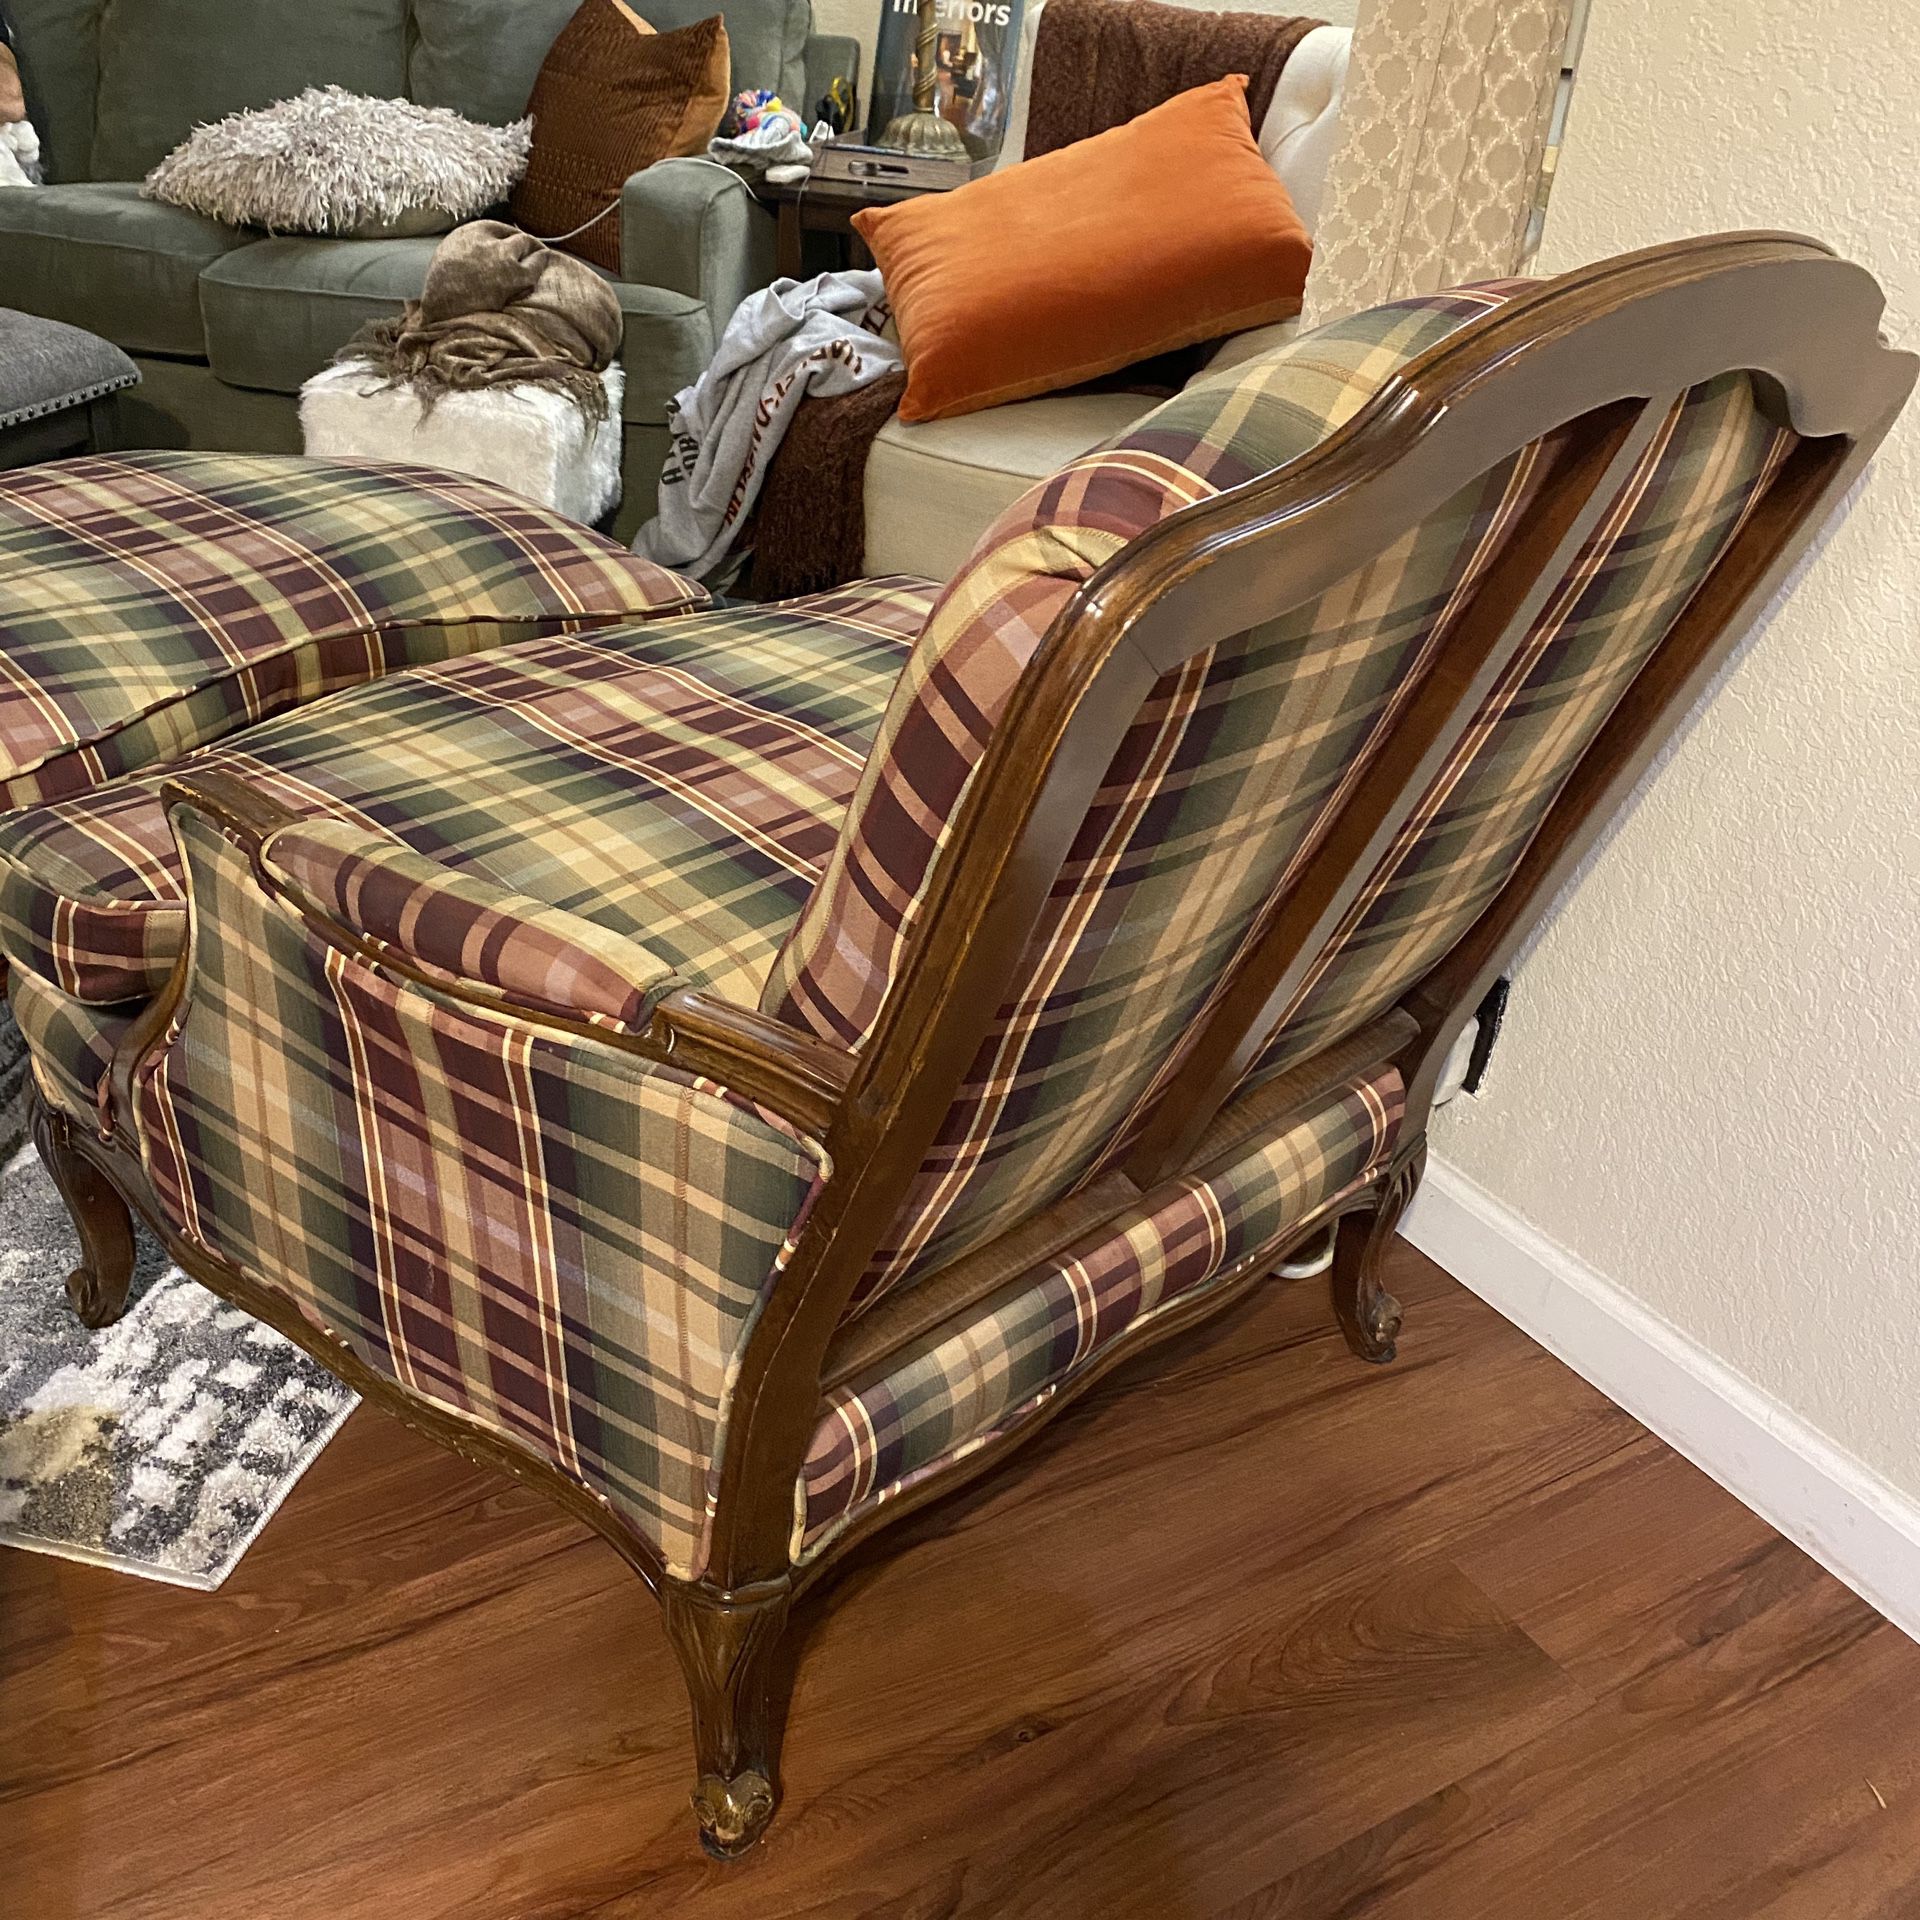 Vintage Ralph Lauren Chair With Ottoman for Sale in Modesto, CA - OfferUp